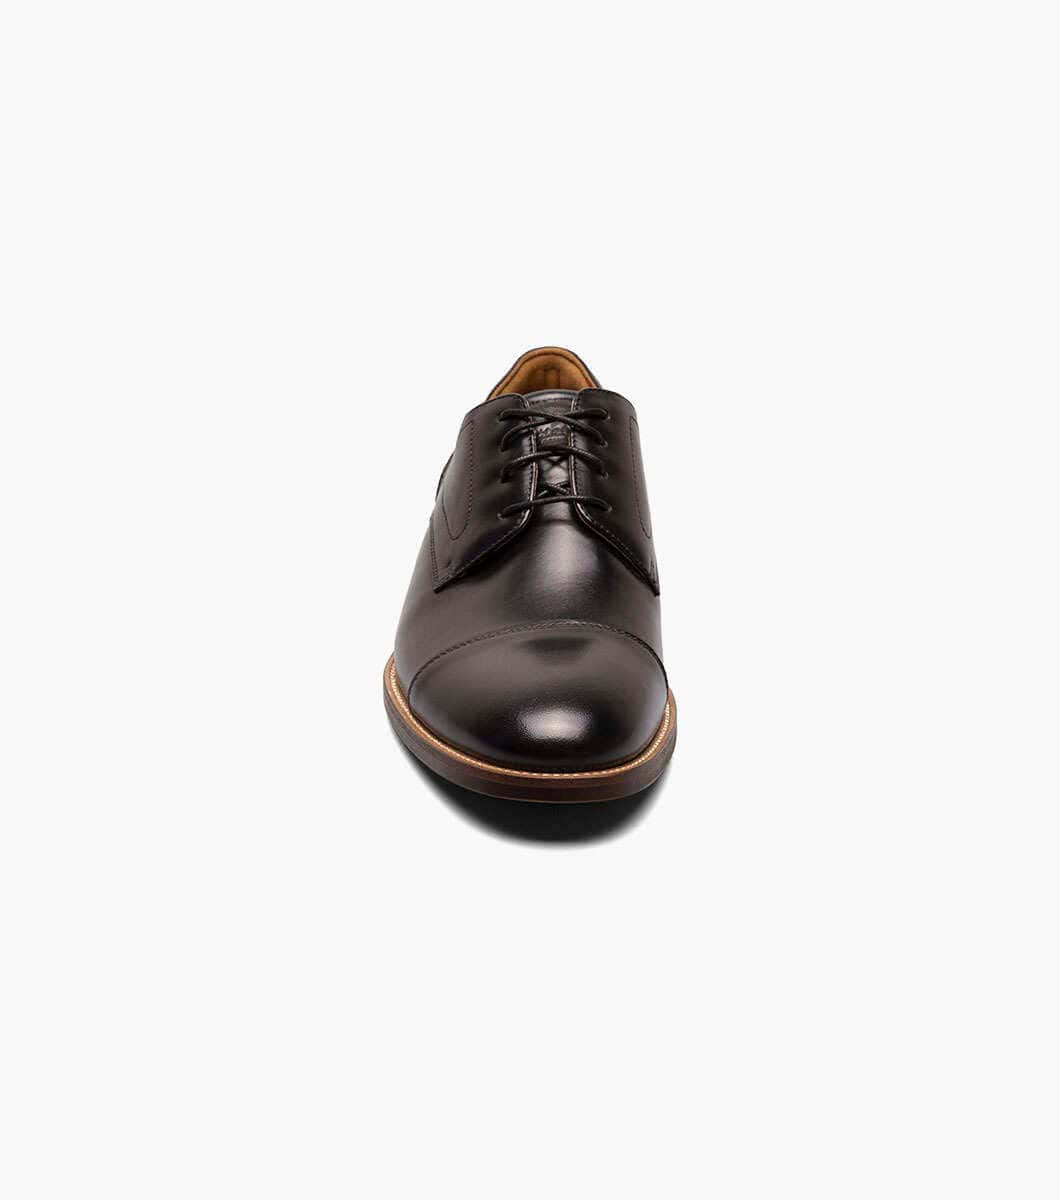 Rucci Cap Oxford product image